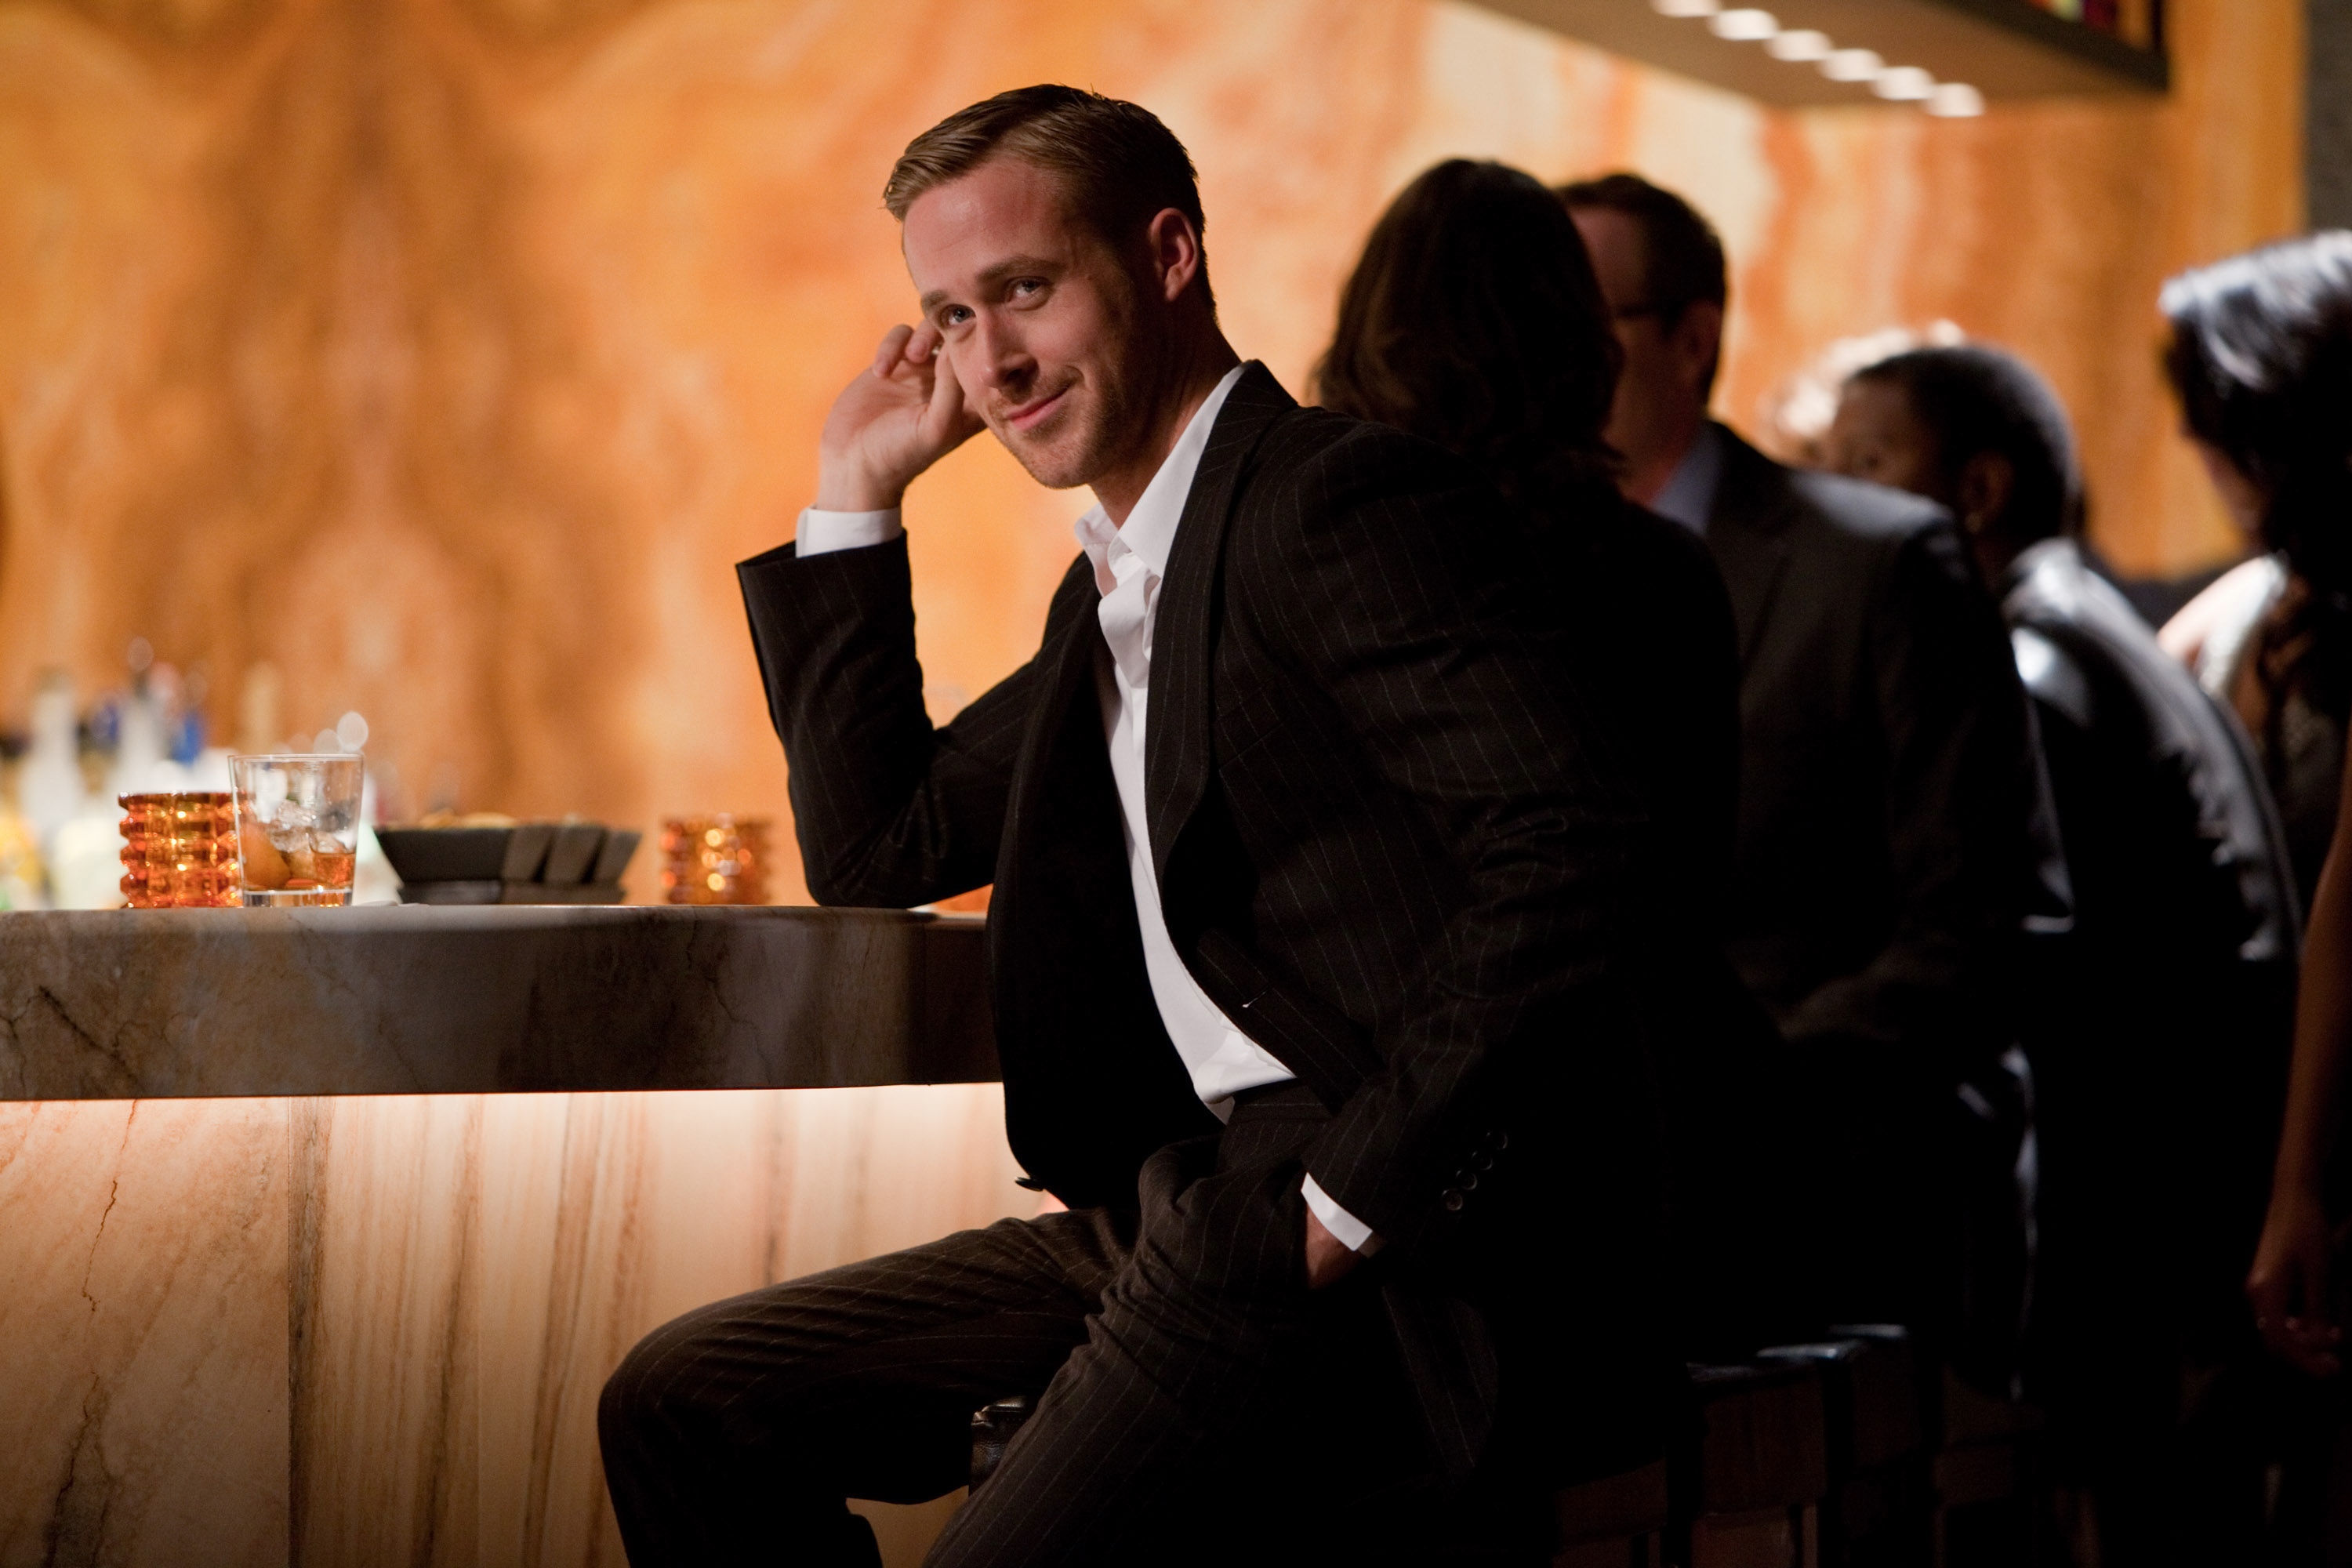 RYAN GOSLING as Jacob in Warner Bros. Pictures’ comedy “CRAZY, STUPID, LOVE.” a Warner Bros. Pictures release.